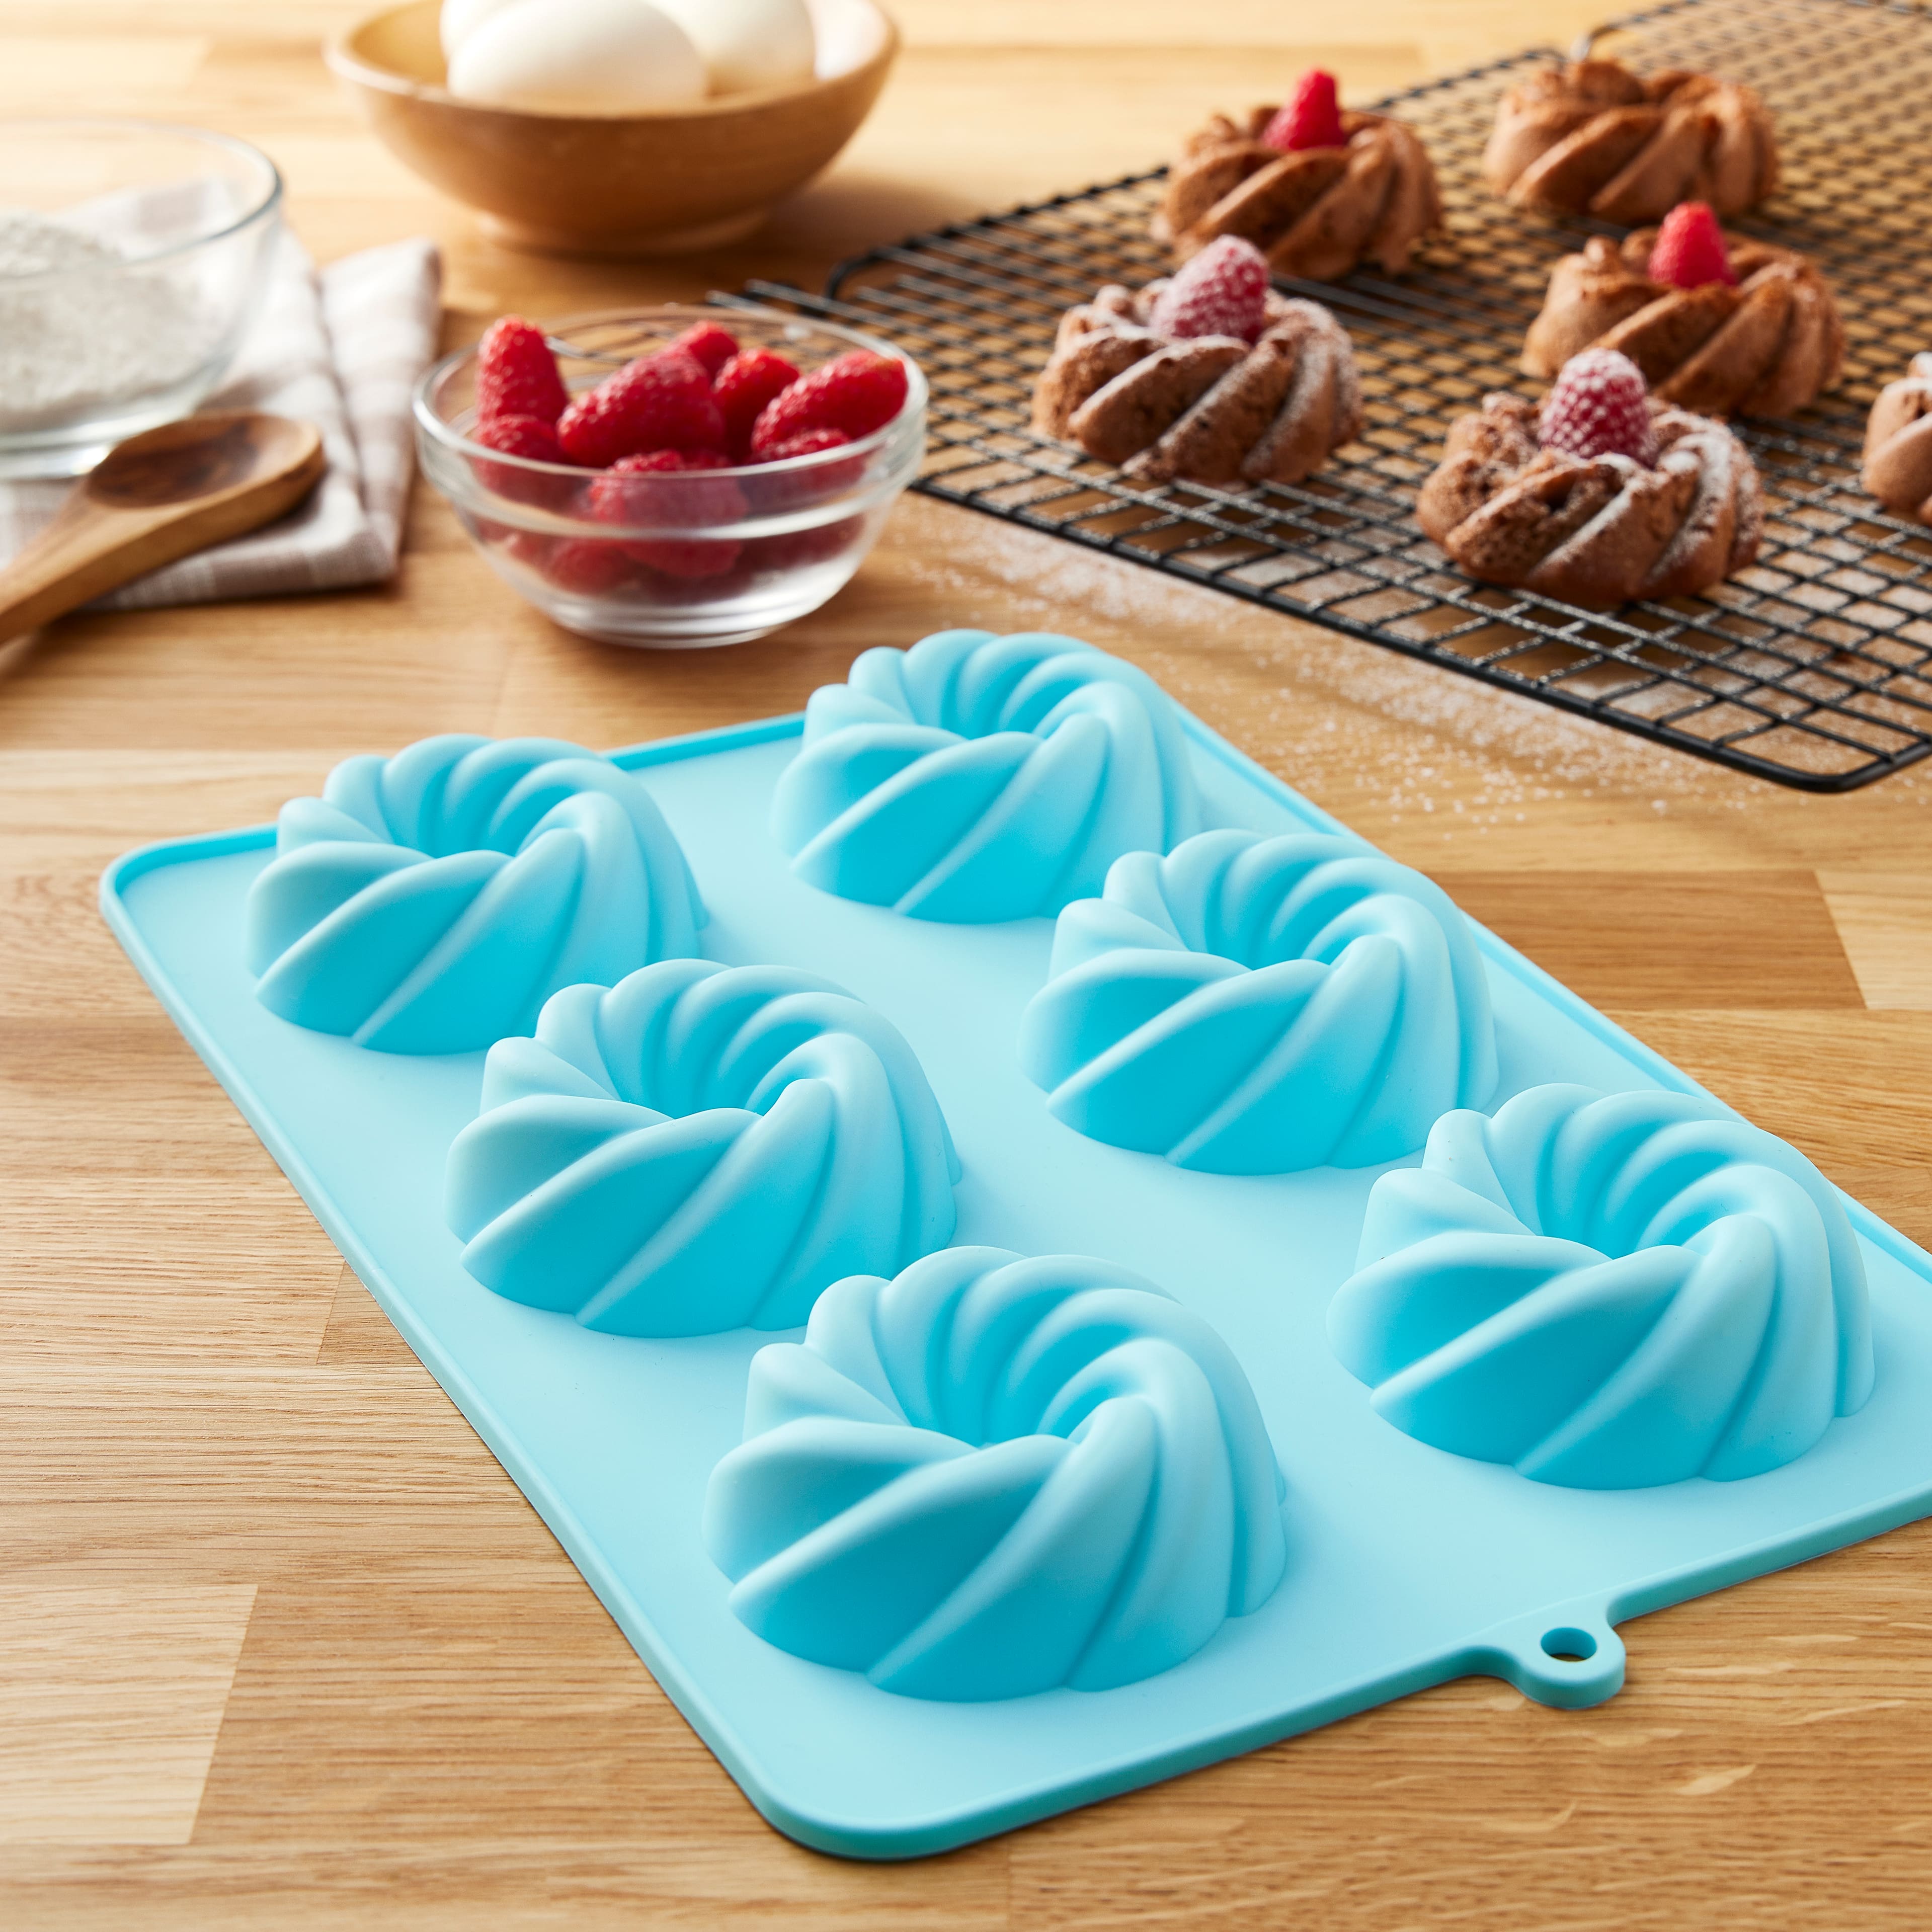 Swirl Fluted Silicone Treat Mold by Celebrate It™